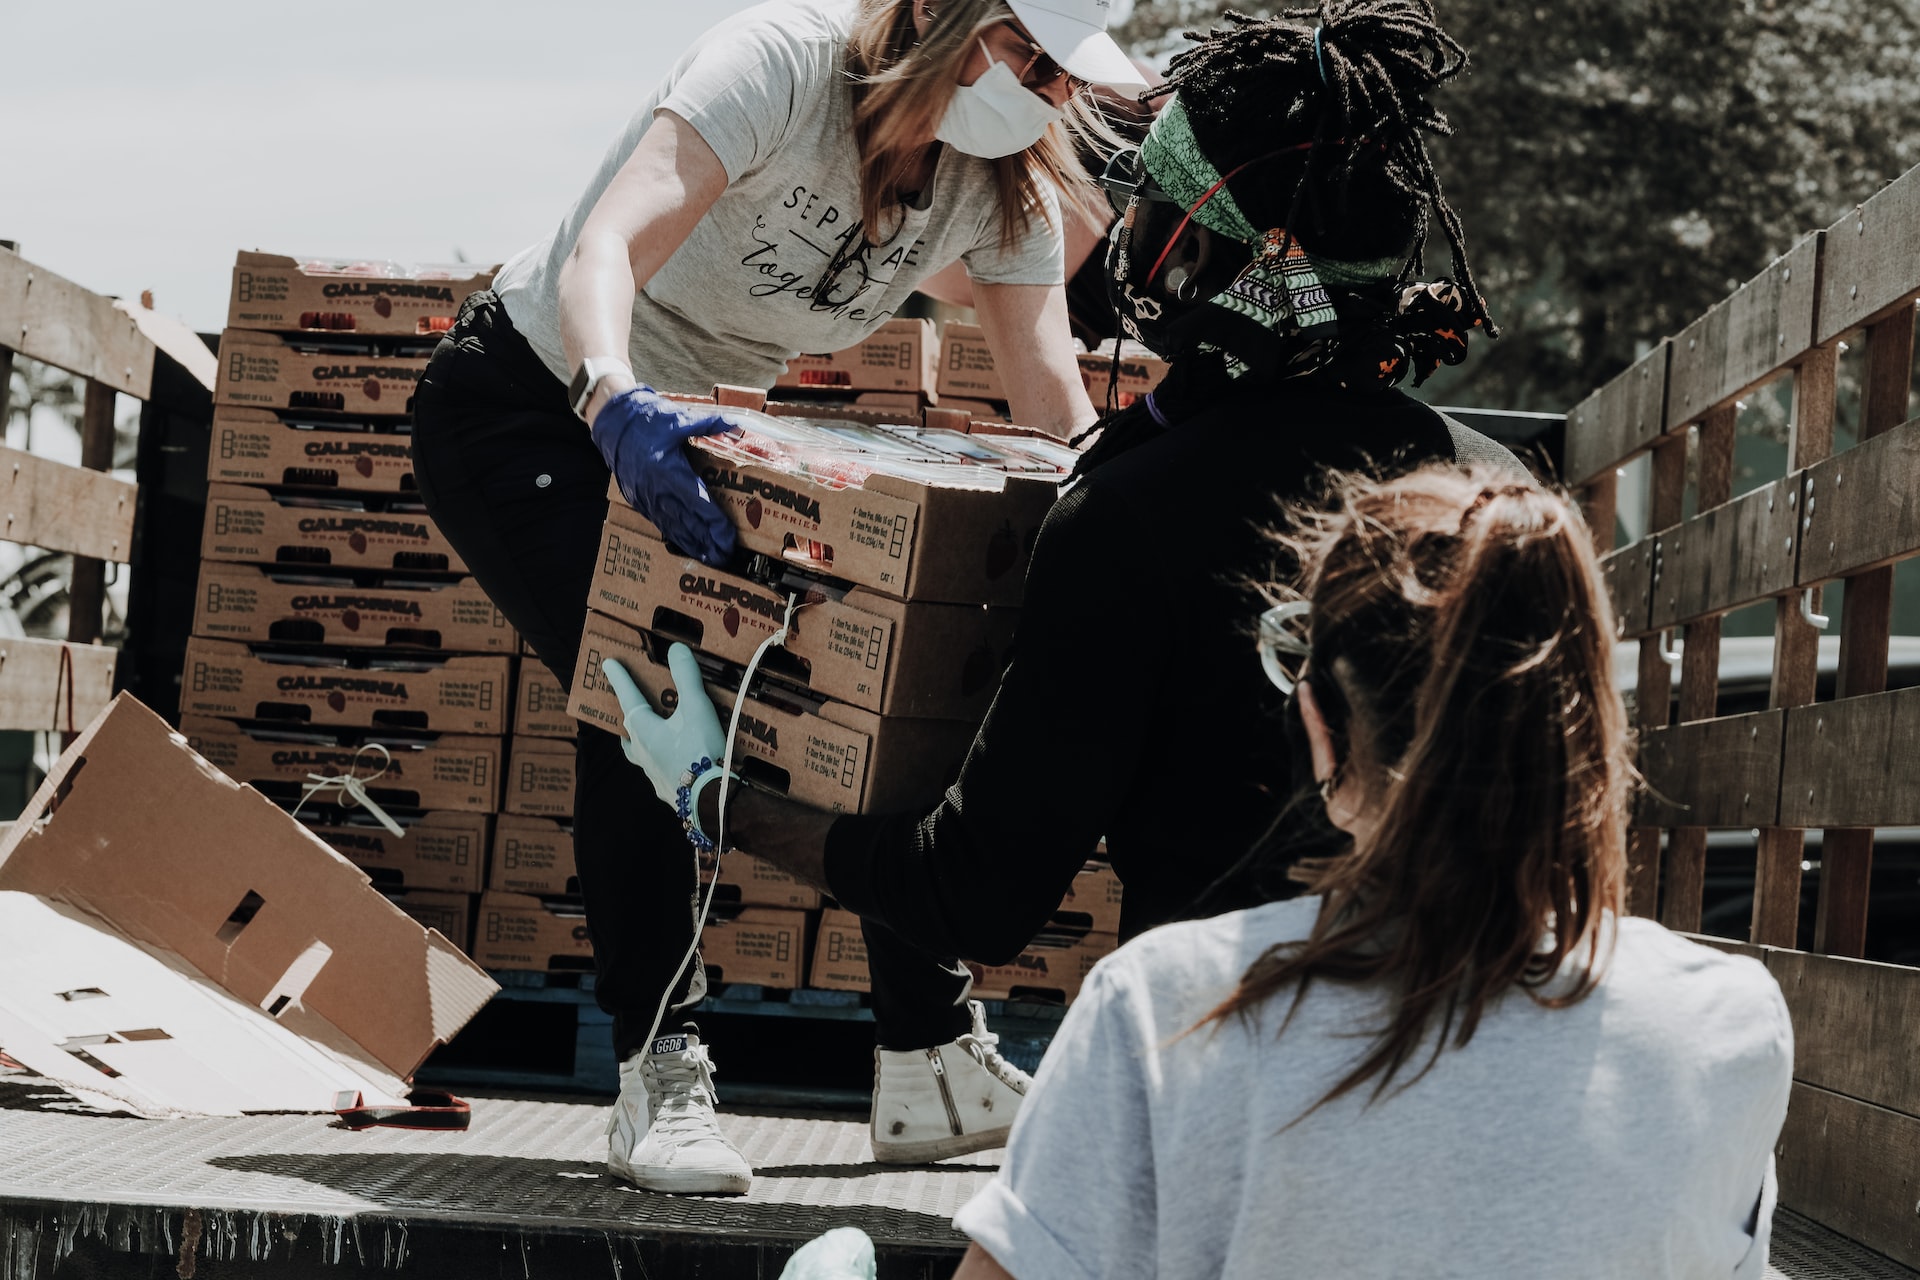 Three people unloading a truck of food donations